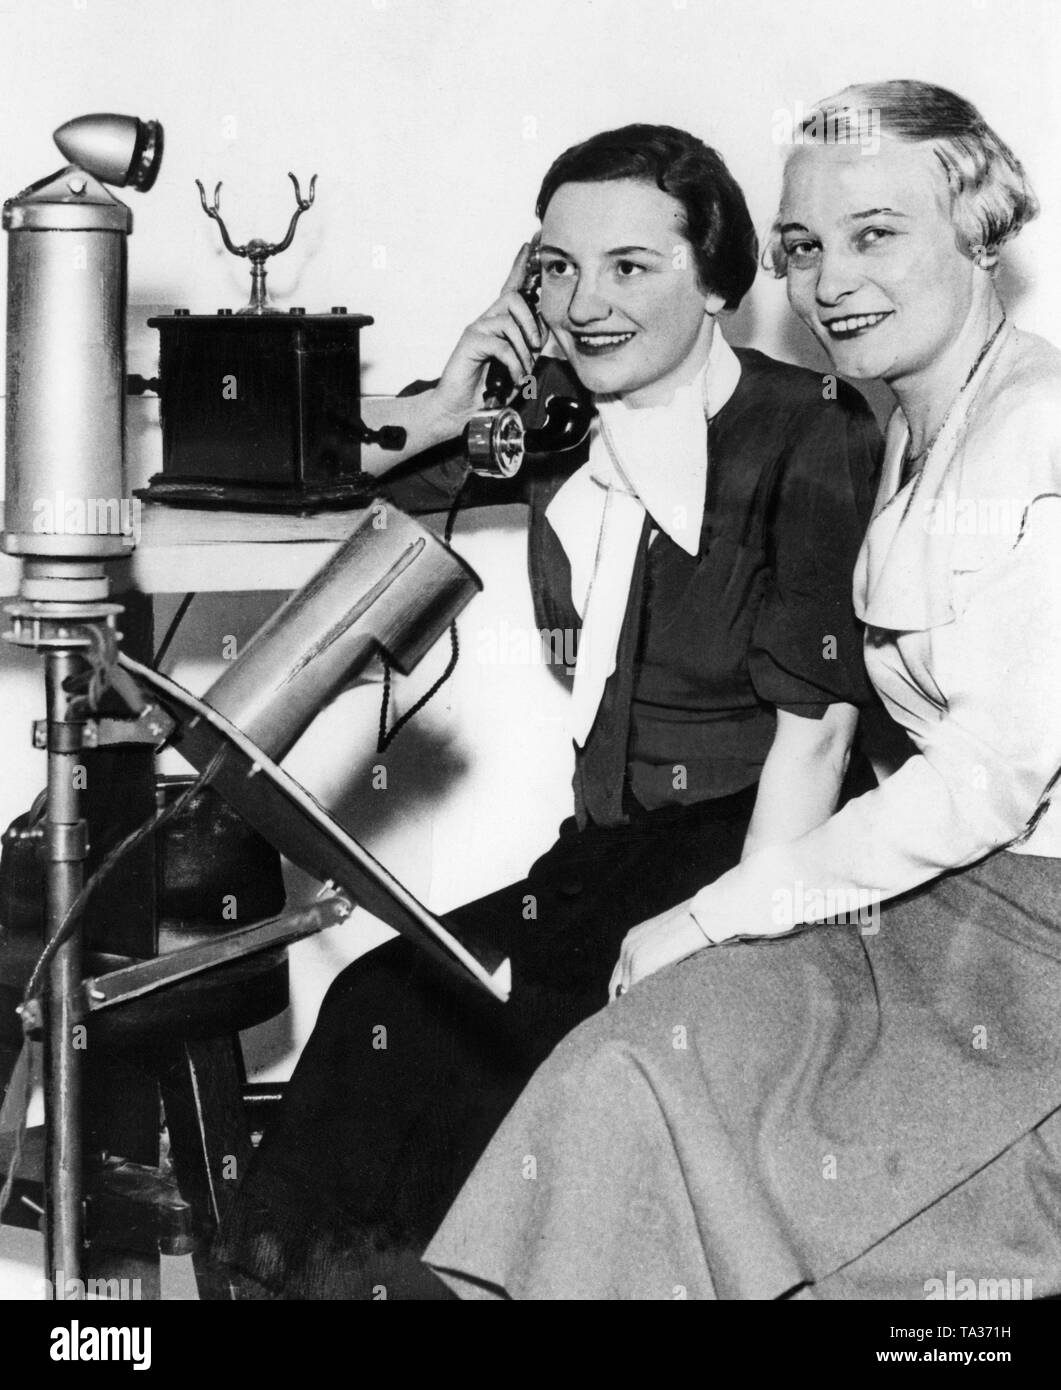 The world's first TV announcers (on the right, Ursula Patzschke) of the TV station 'Paul Nipkow', which, together with the German Reichspost, broadcasted for the first time television shows four times a week. Stock Photo